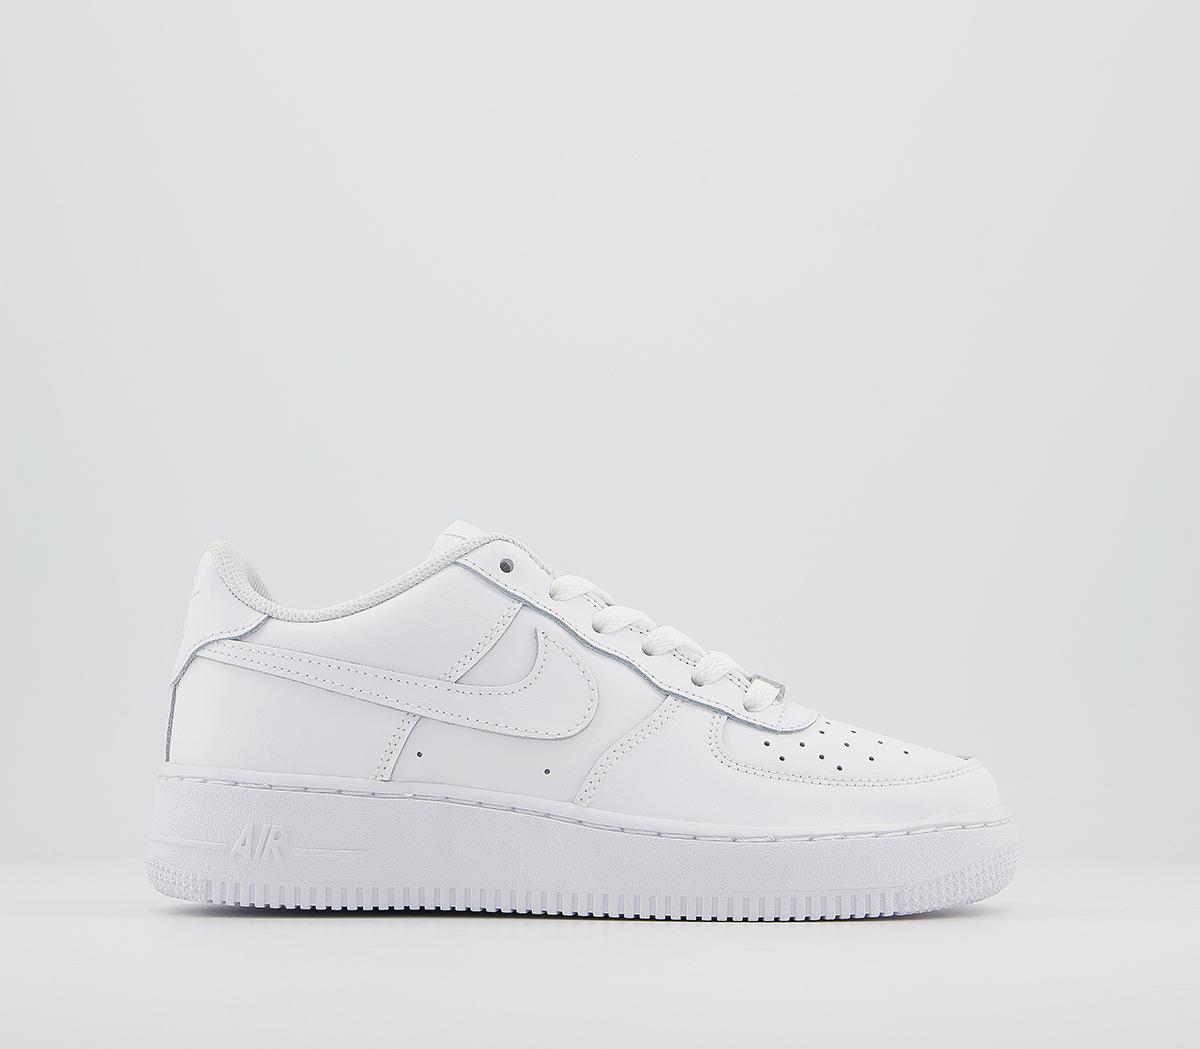 boys air force 1 shoes